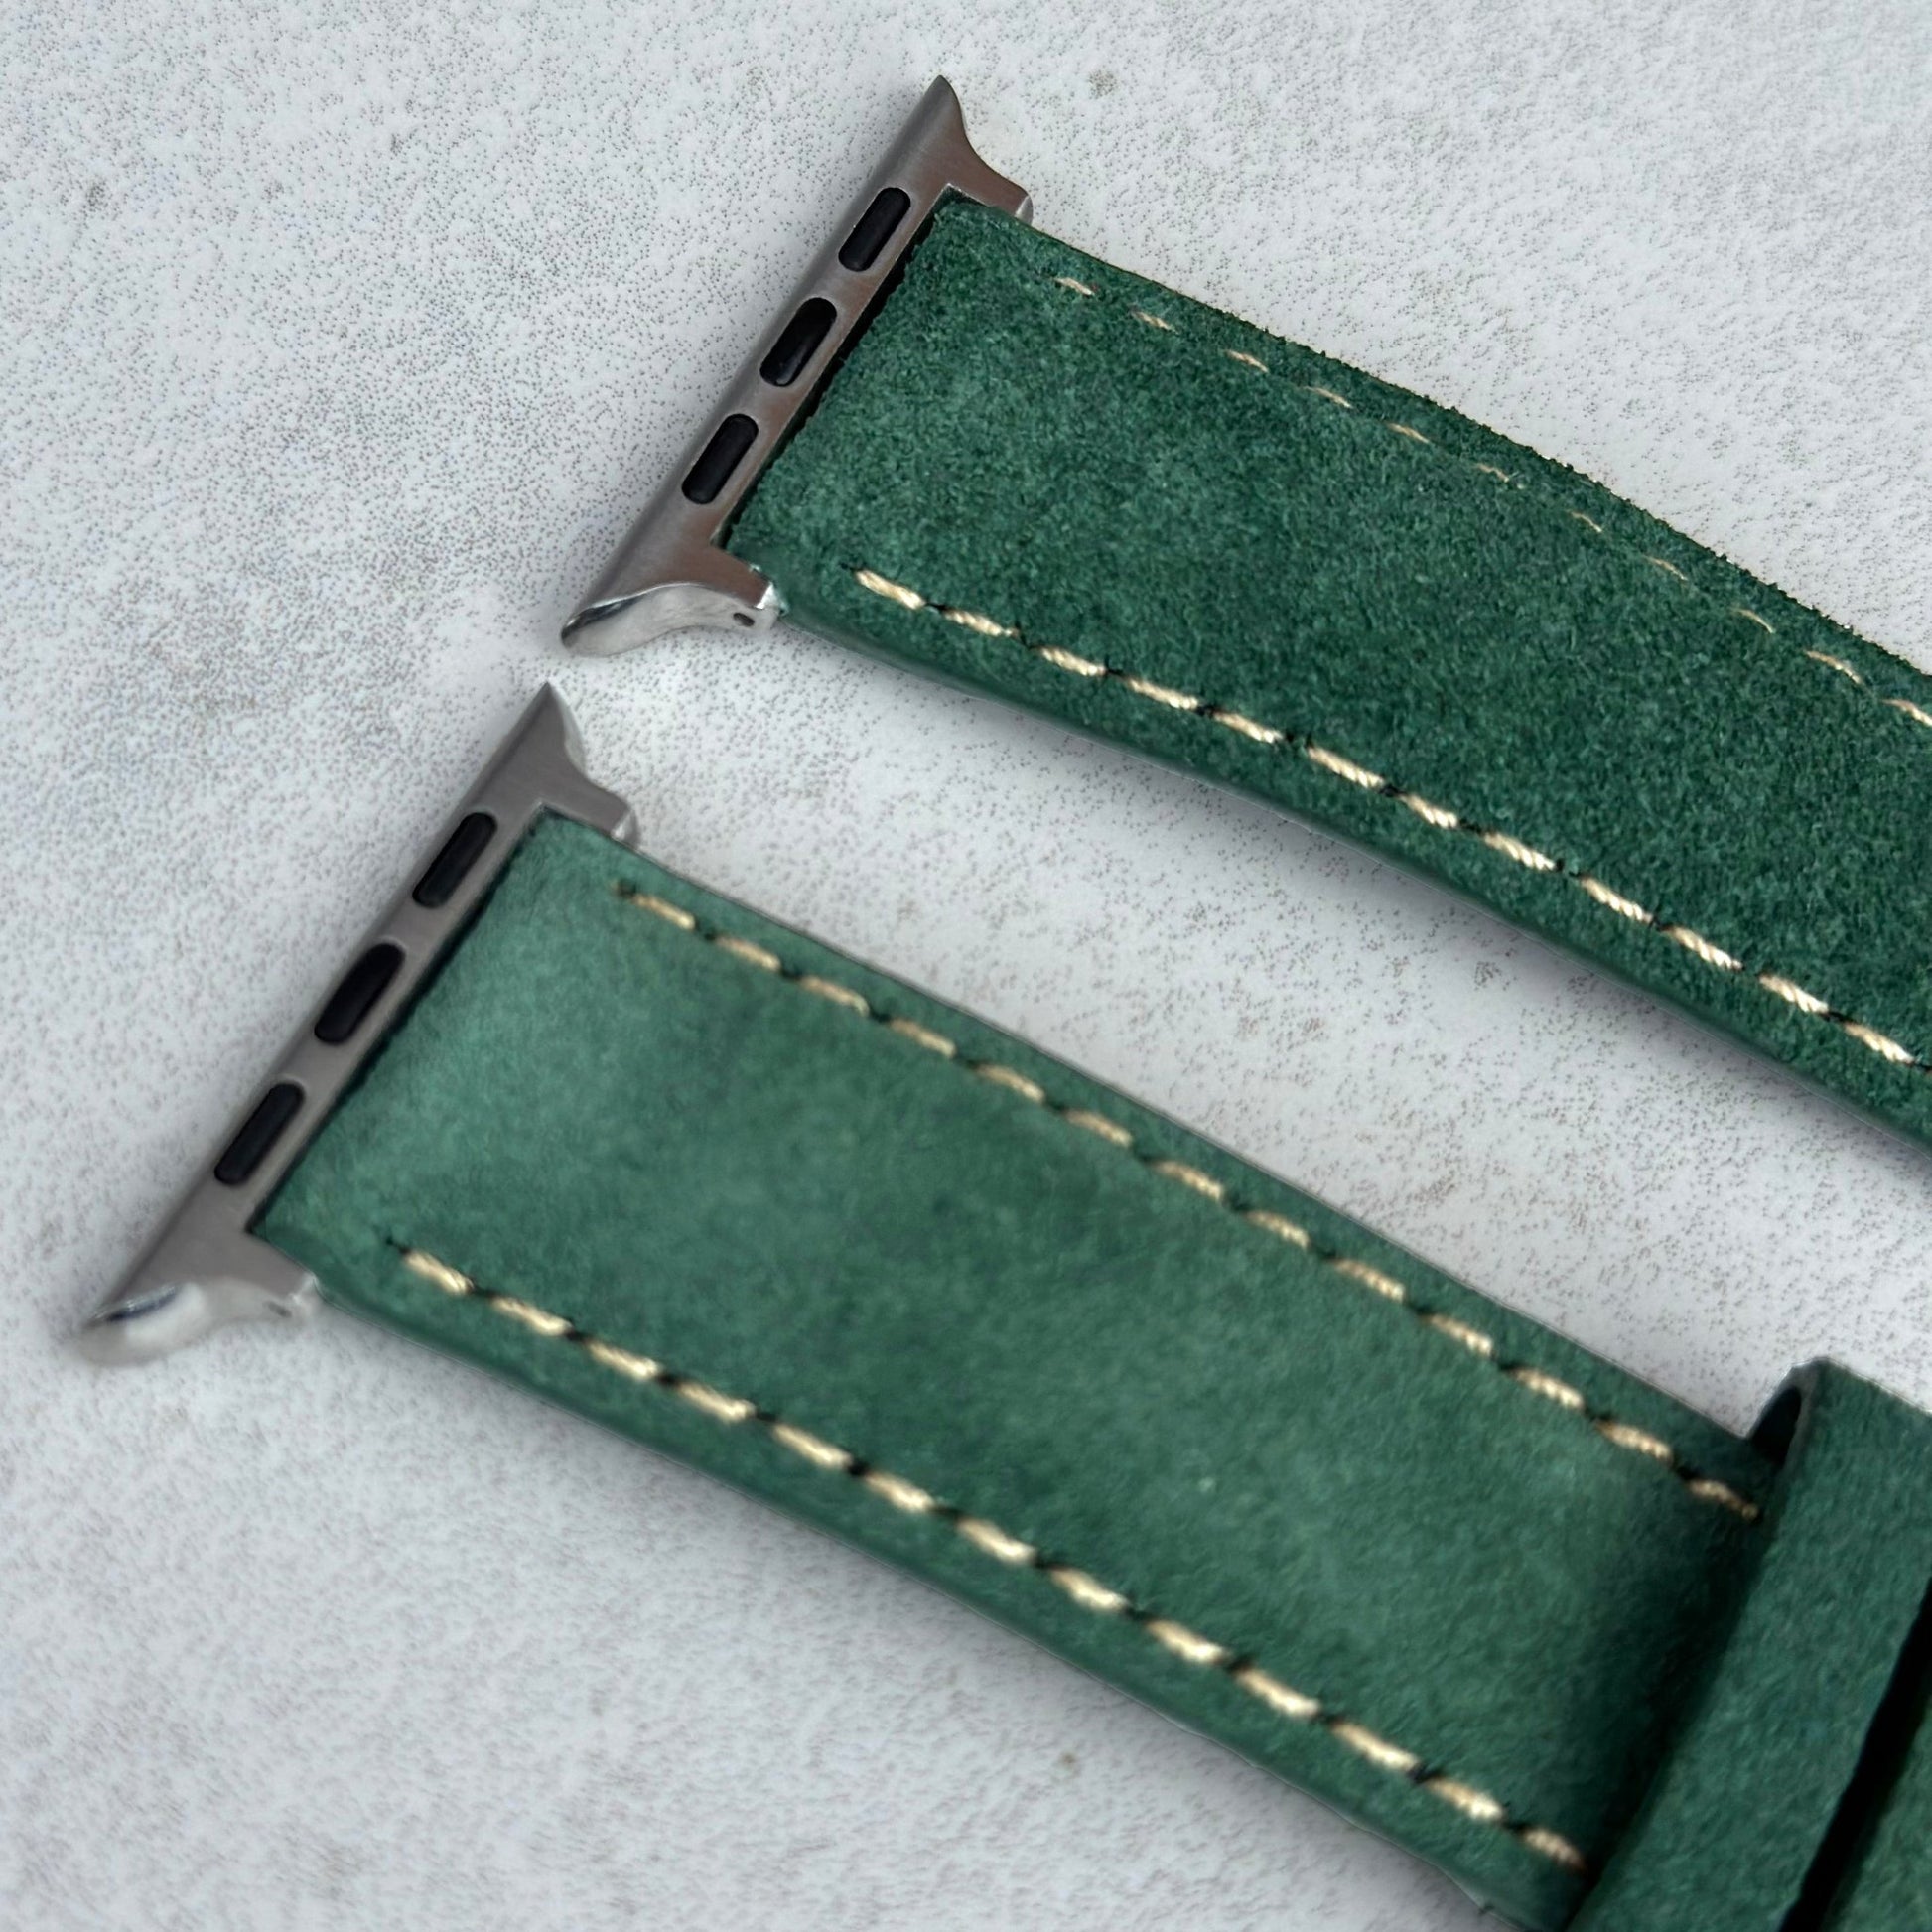 Top of the hunter green suede Apple Watch strap. Padded suede Apple Watch strap. Contrast ivory stitching. Watch And Strap